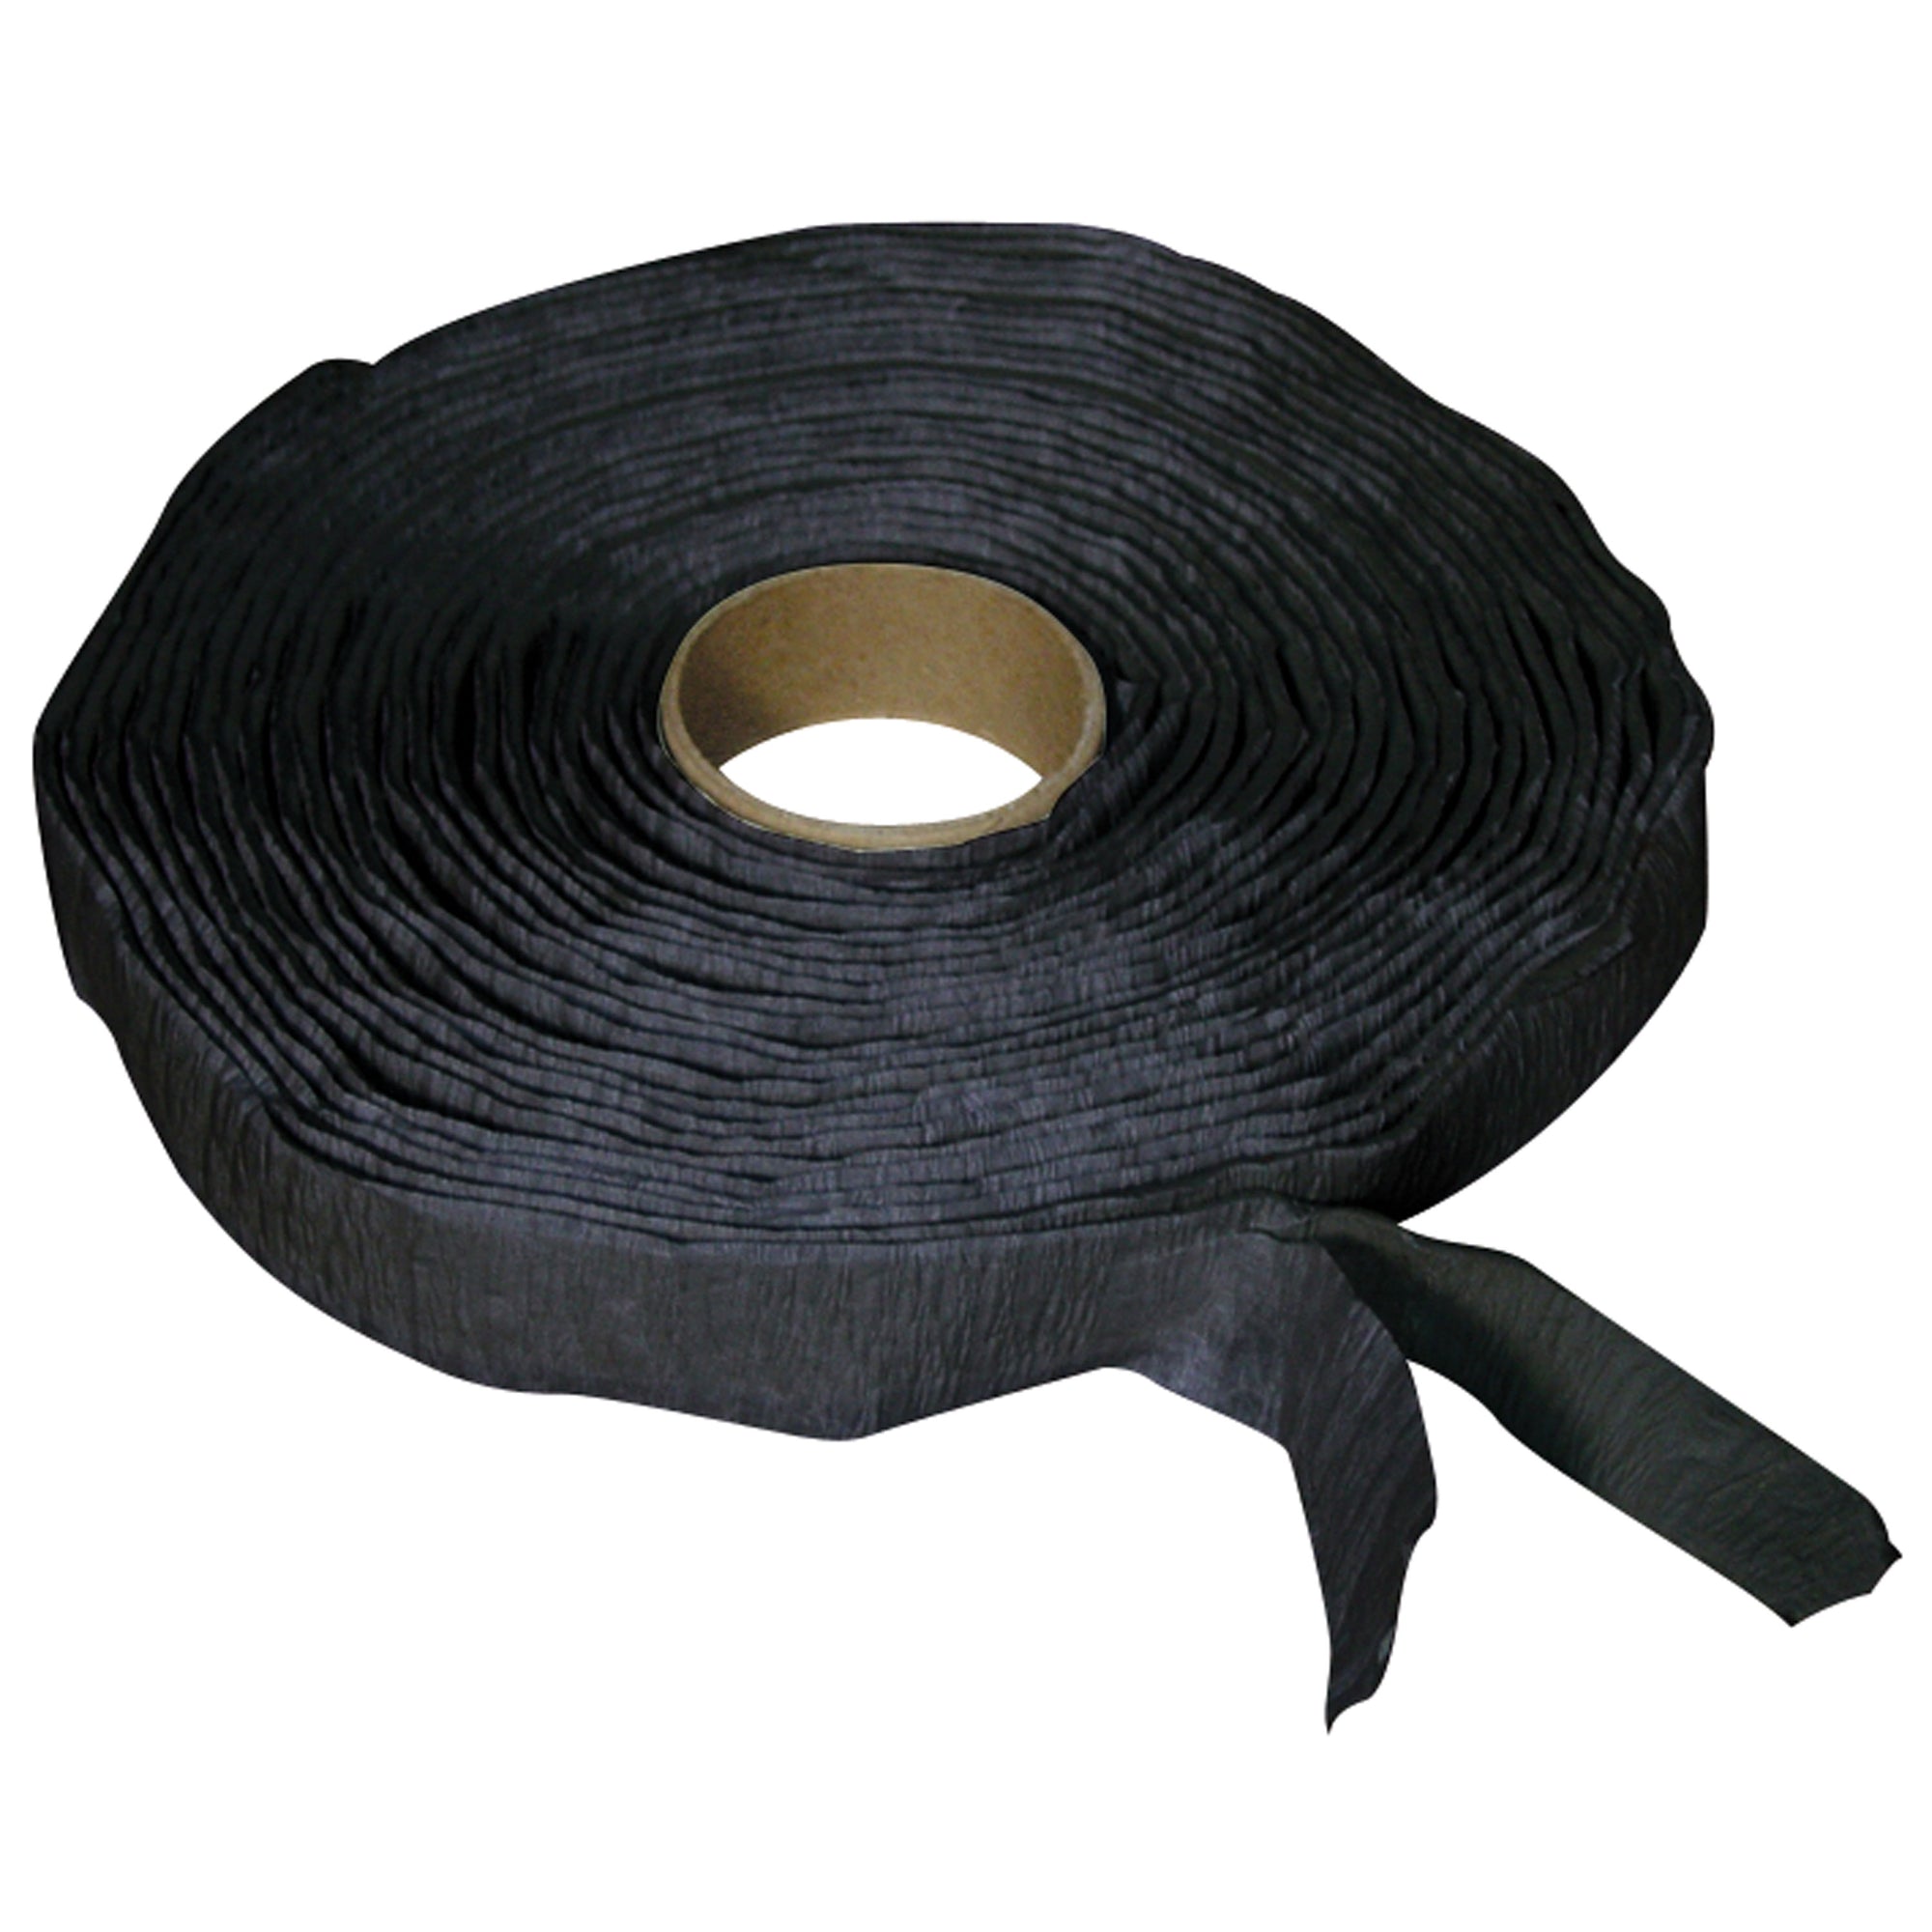 Heng's 16-5025 Non-Trimmable Butyl Tape, Black - 1/8" x 1" x 30'